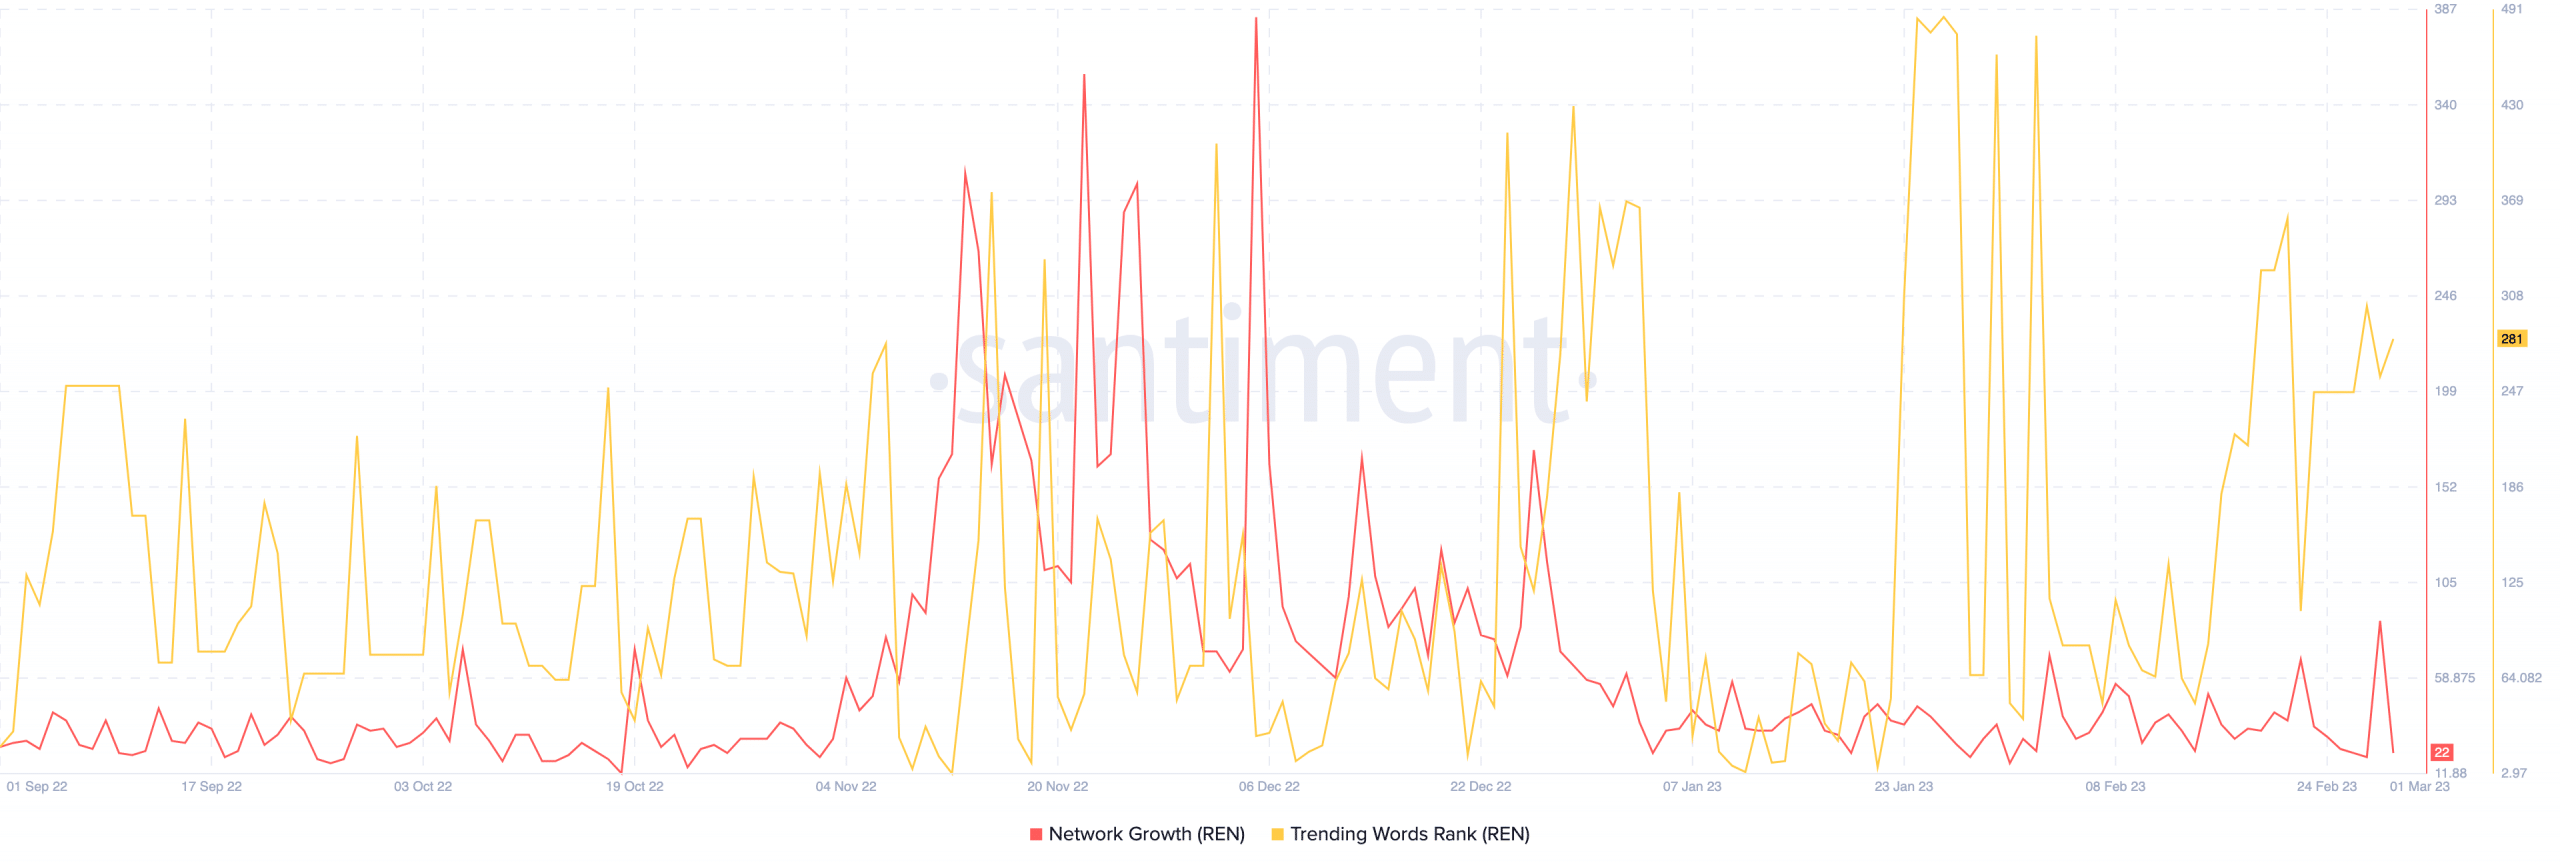 REN network growth and rank on the trending words